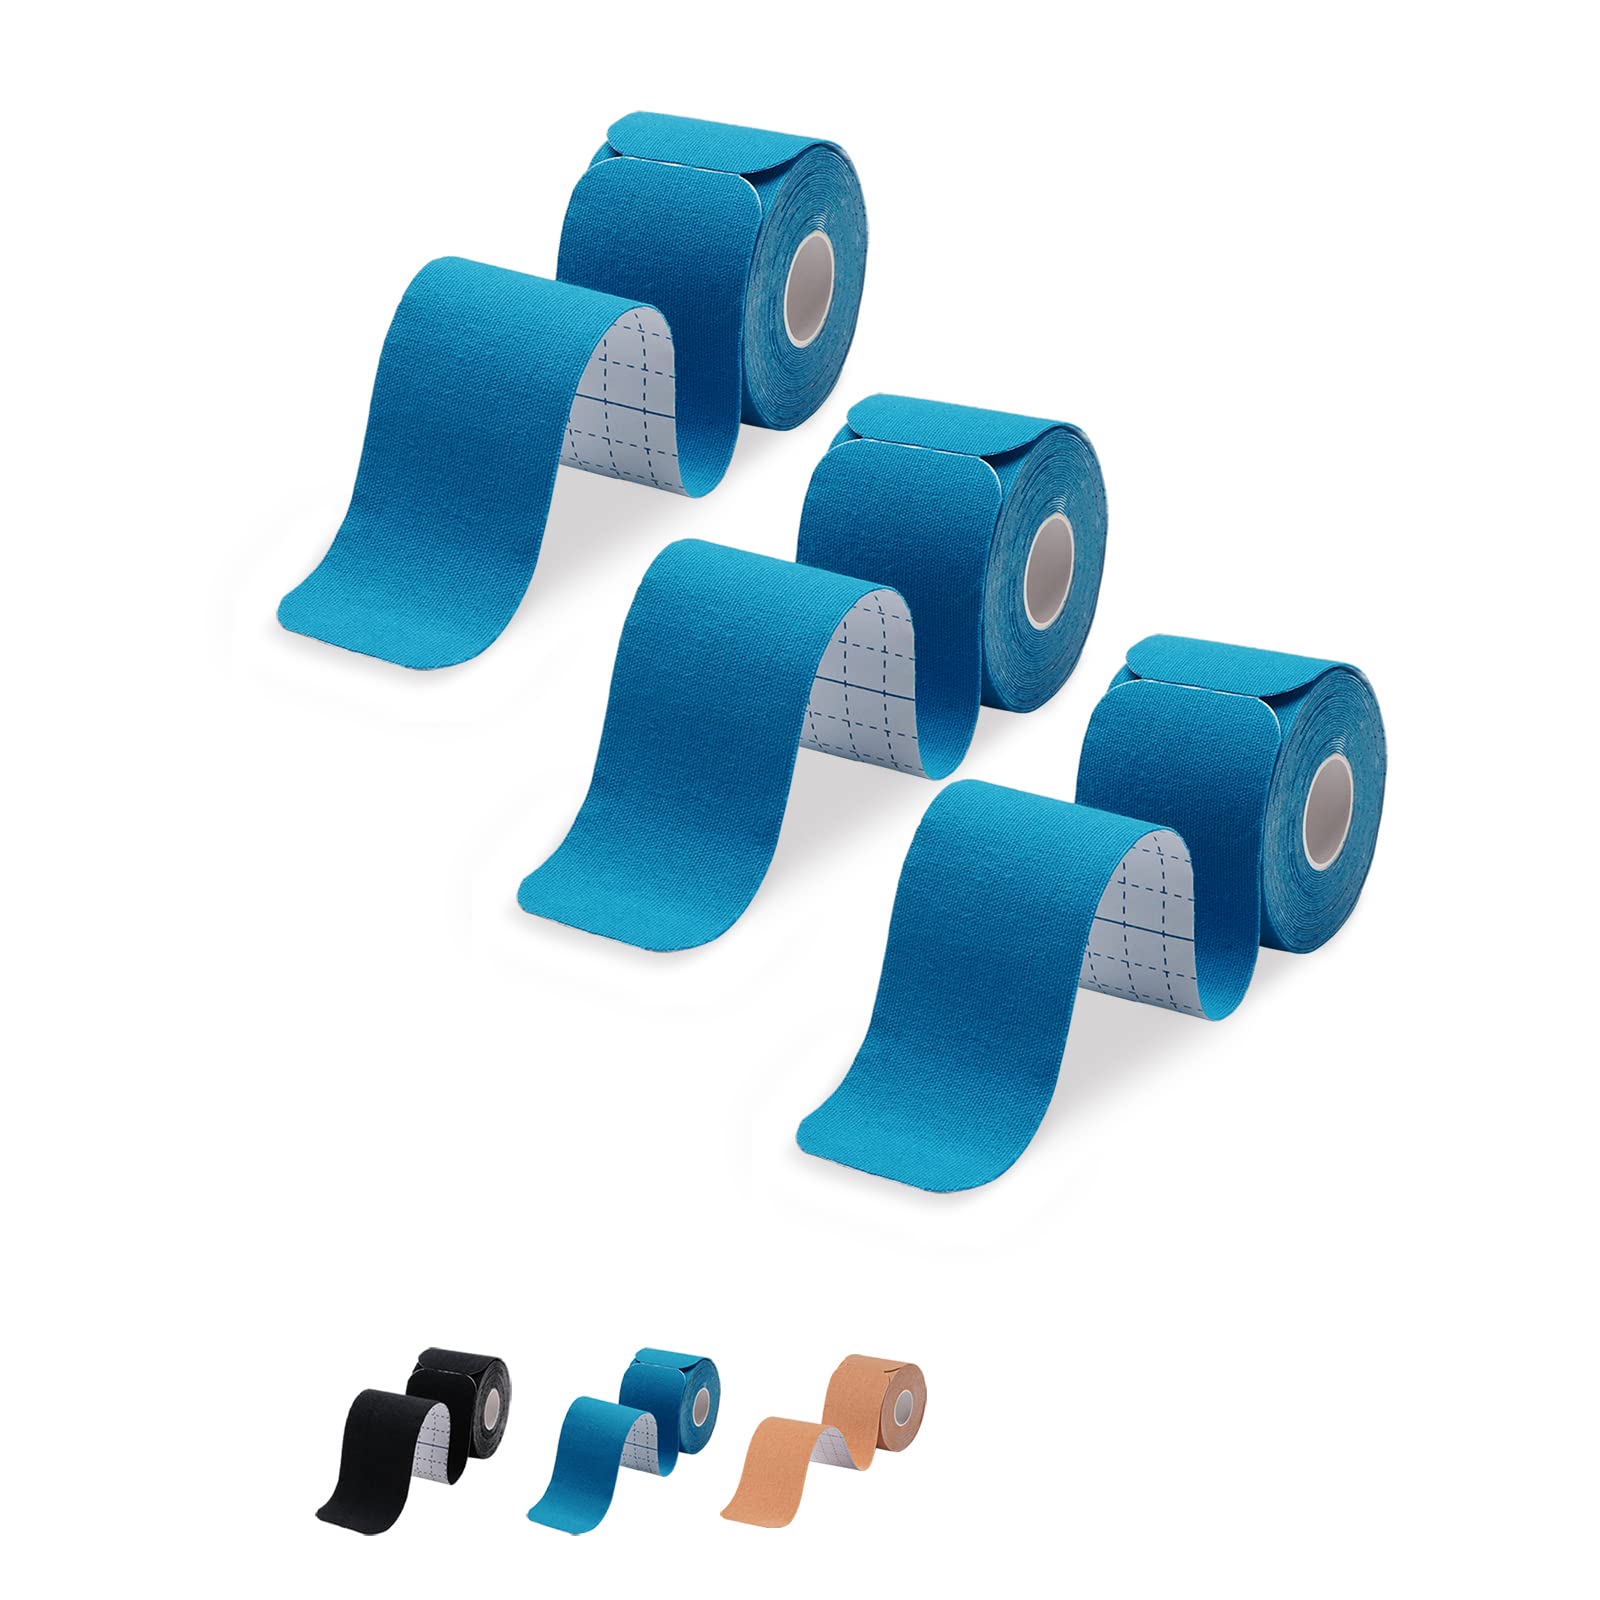 crossfit tape, crossfit tape Suppliers and Manufacturers at